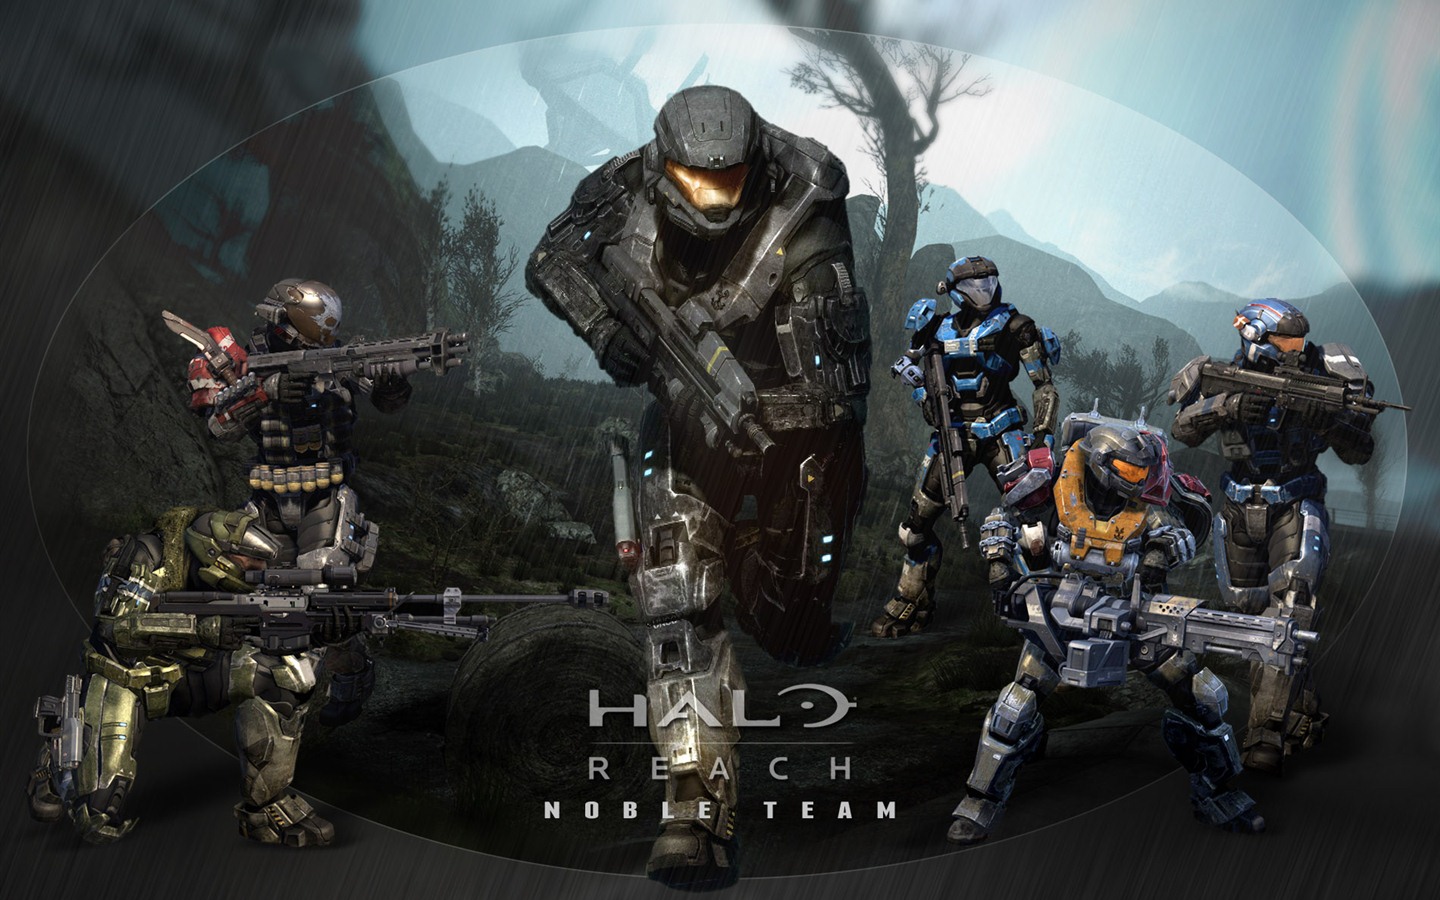 Halo game HD wallpapers #23 - 1440x900